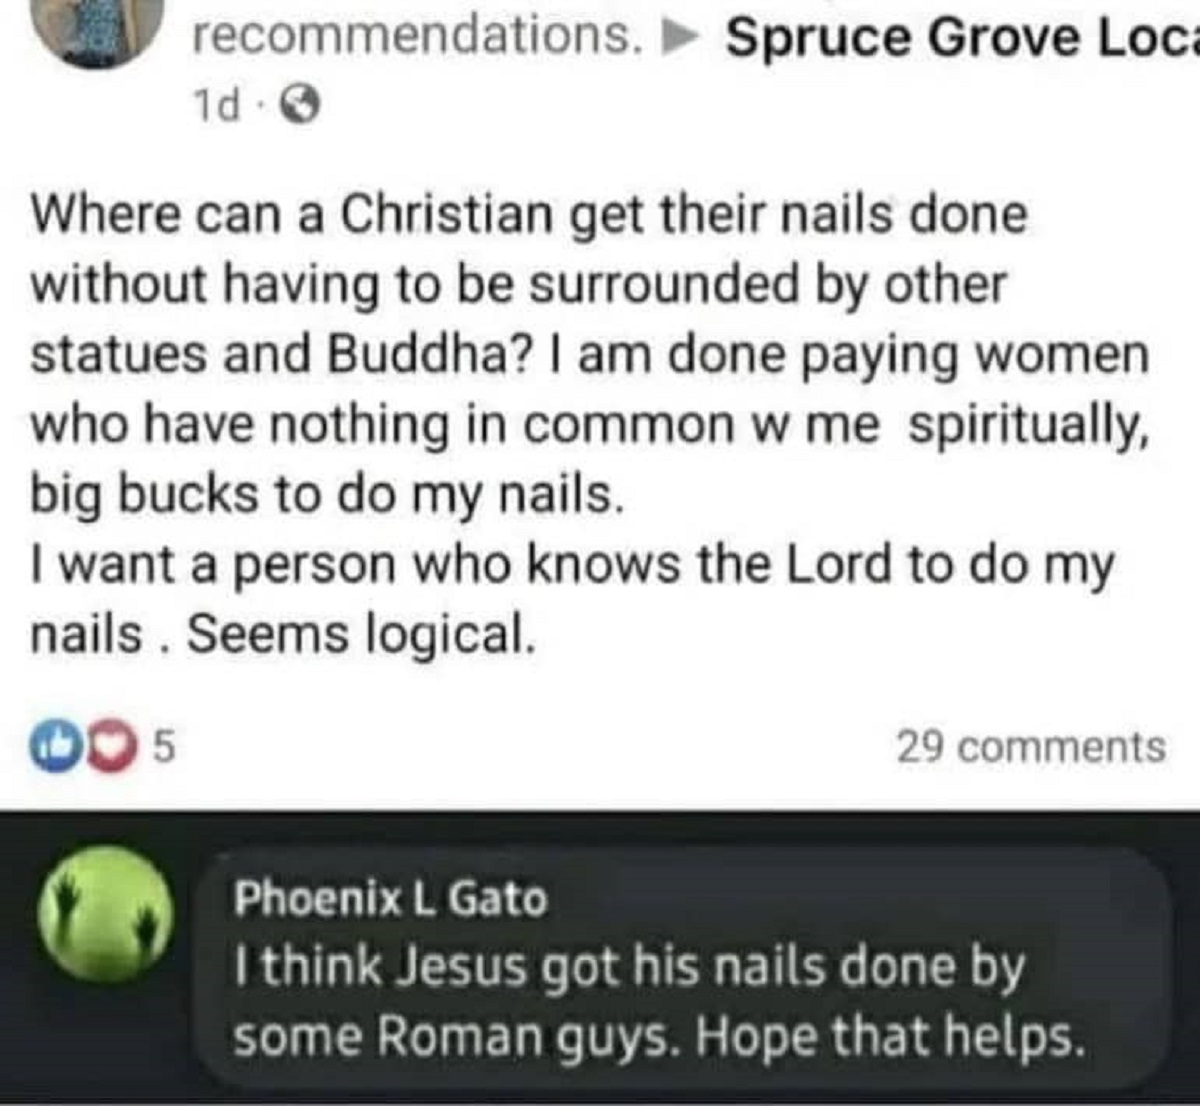 screenshot - recommendations. Spruce Grove Loca 1d> Where can a Christian get their nails done without having to be surrounded by other statues and Buddha? I am done paying women who have nothing in common w me spiritually, big bucks to do my nails. I wan